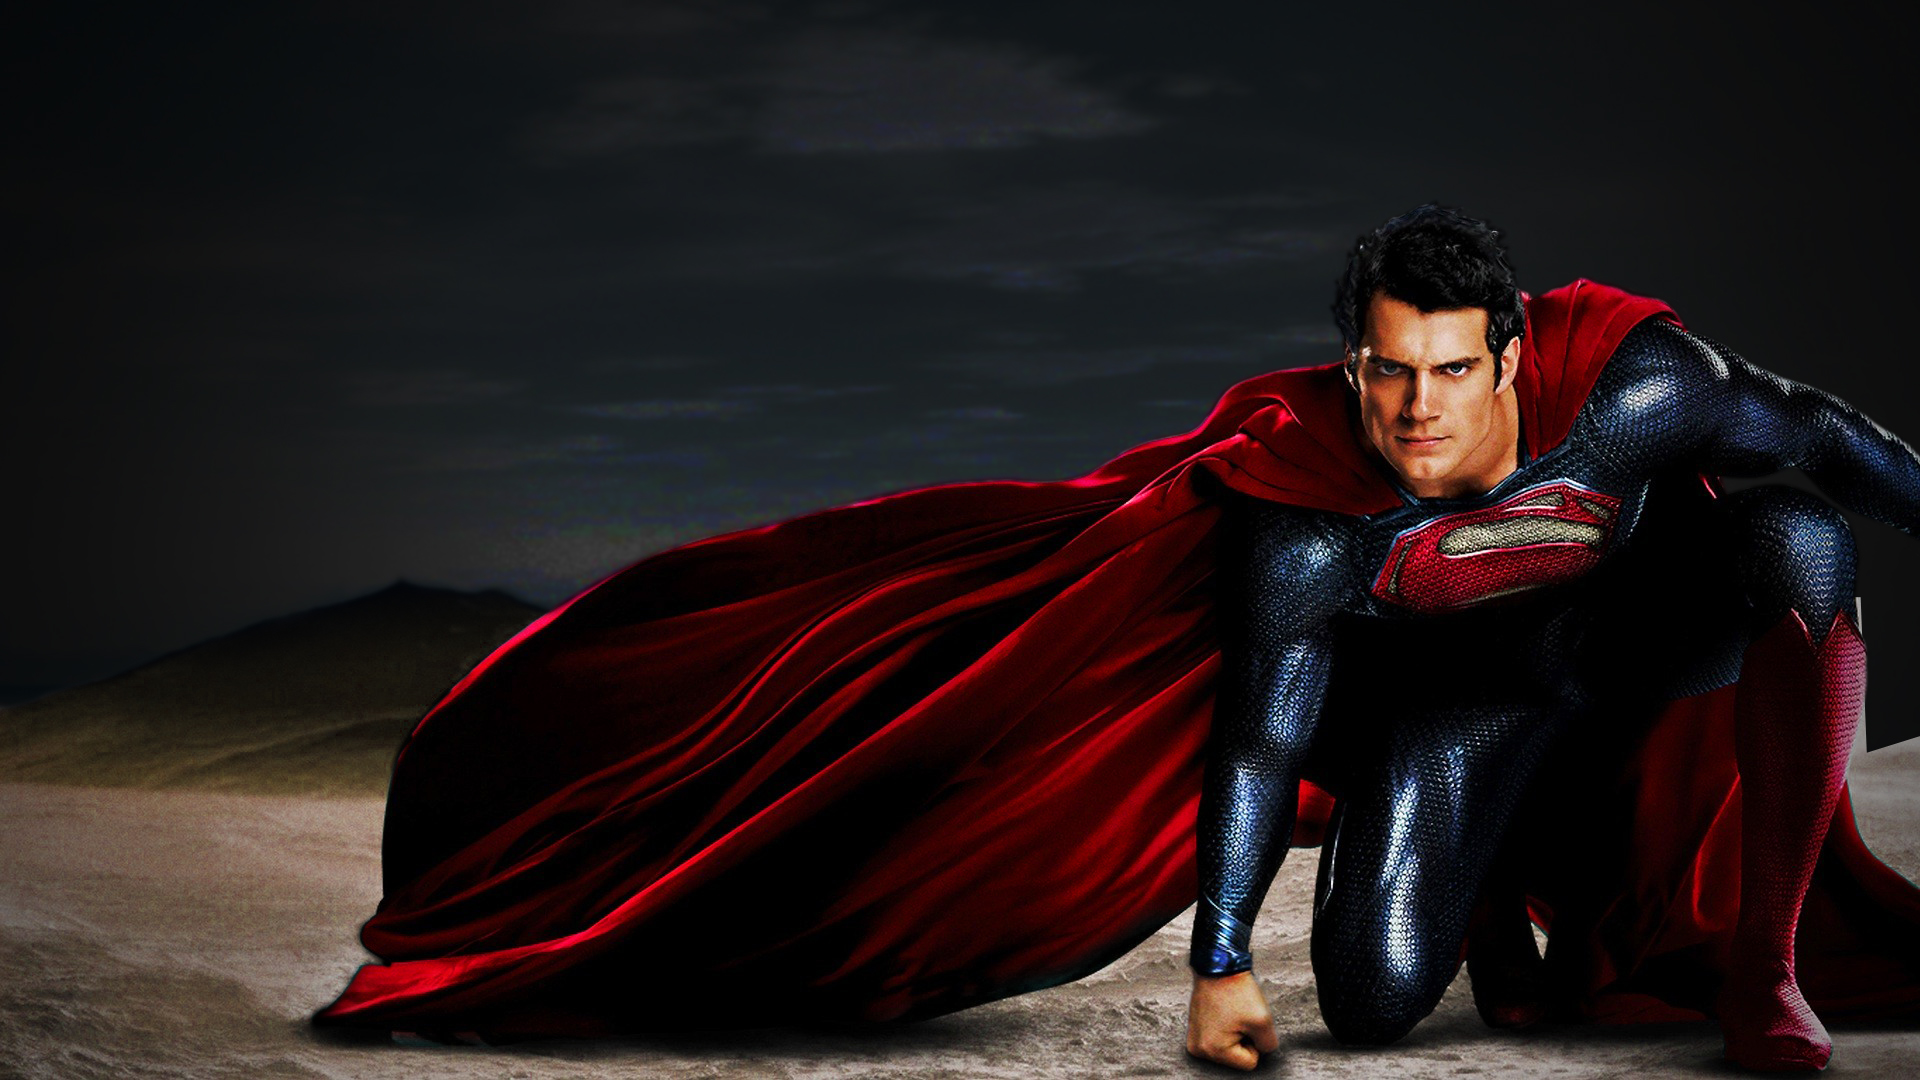  on August By Stephen Comments Off on Man of Steel Wallpapers